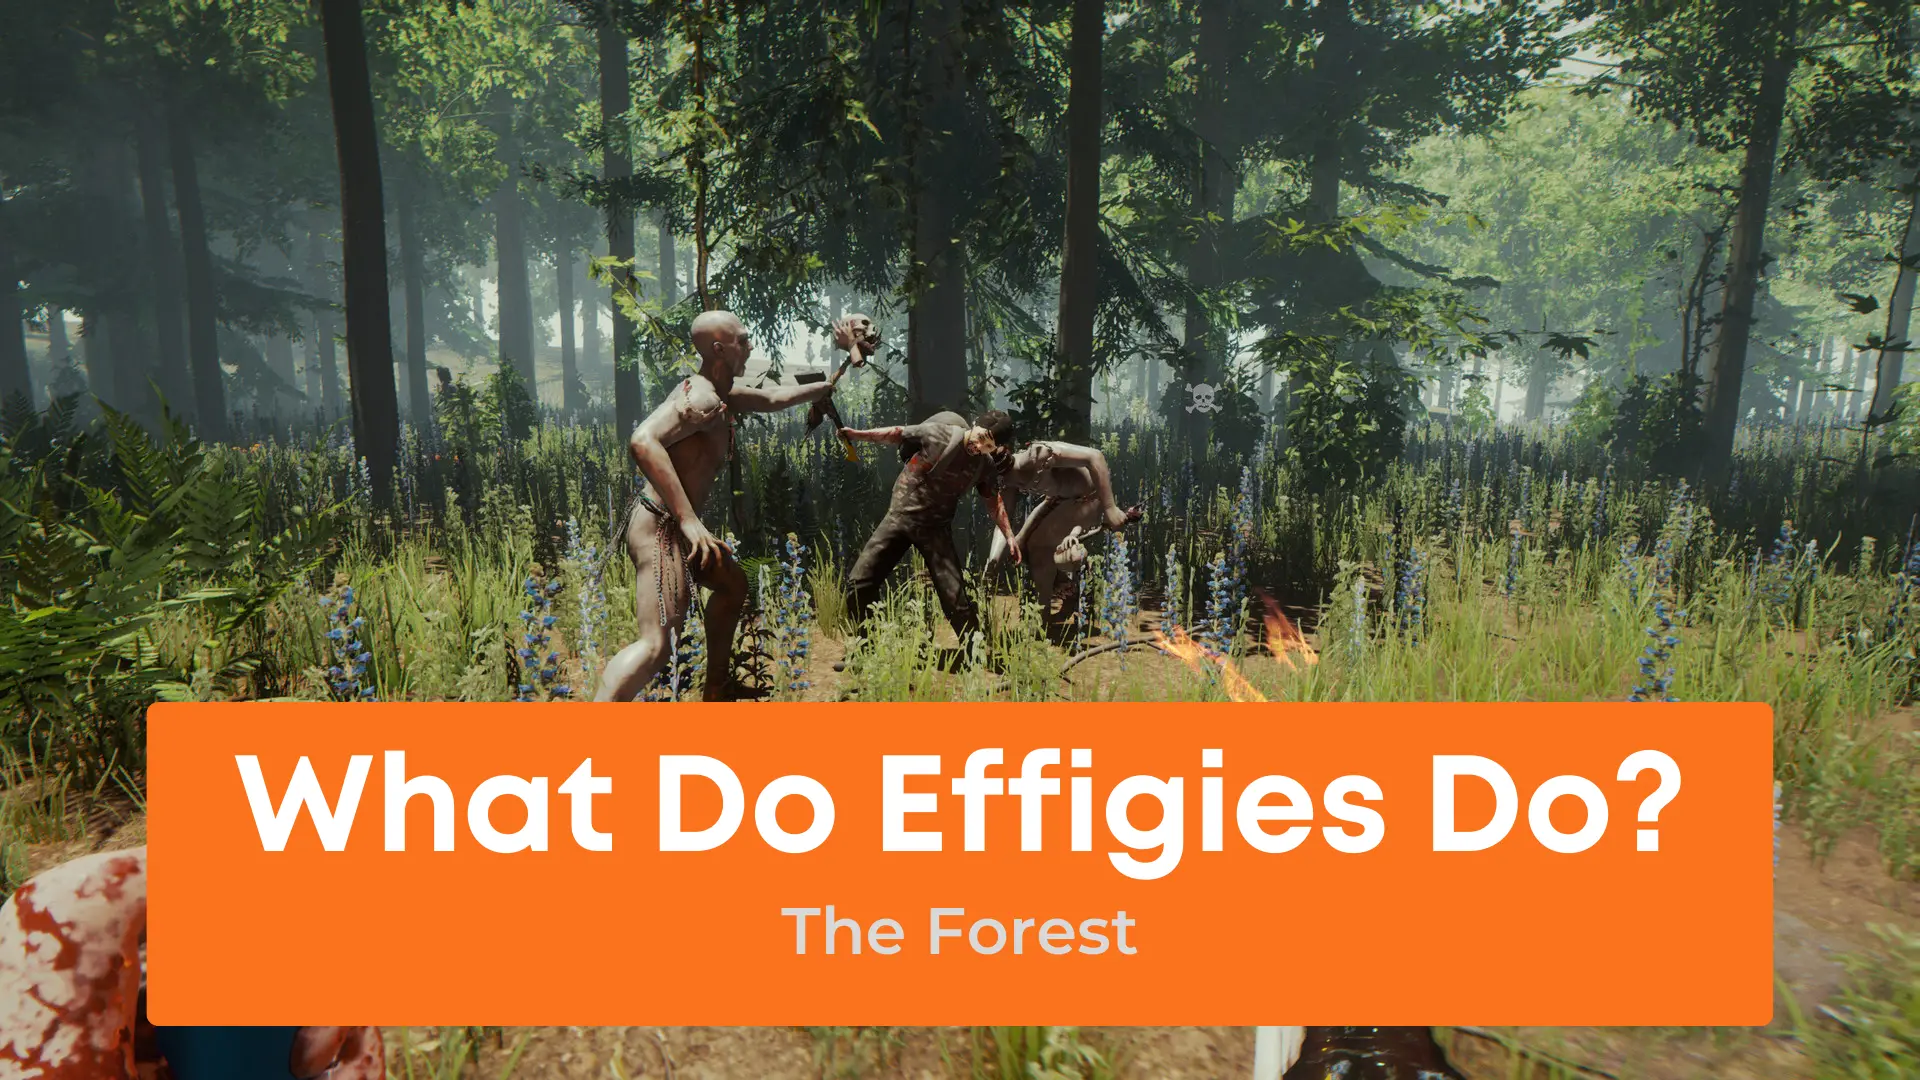 What Do Effigies Do in The Forest